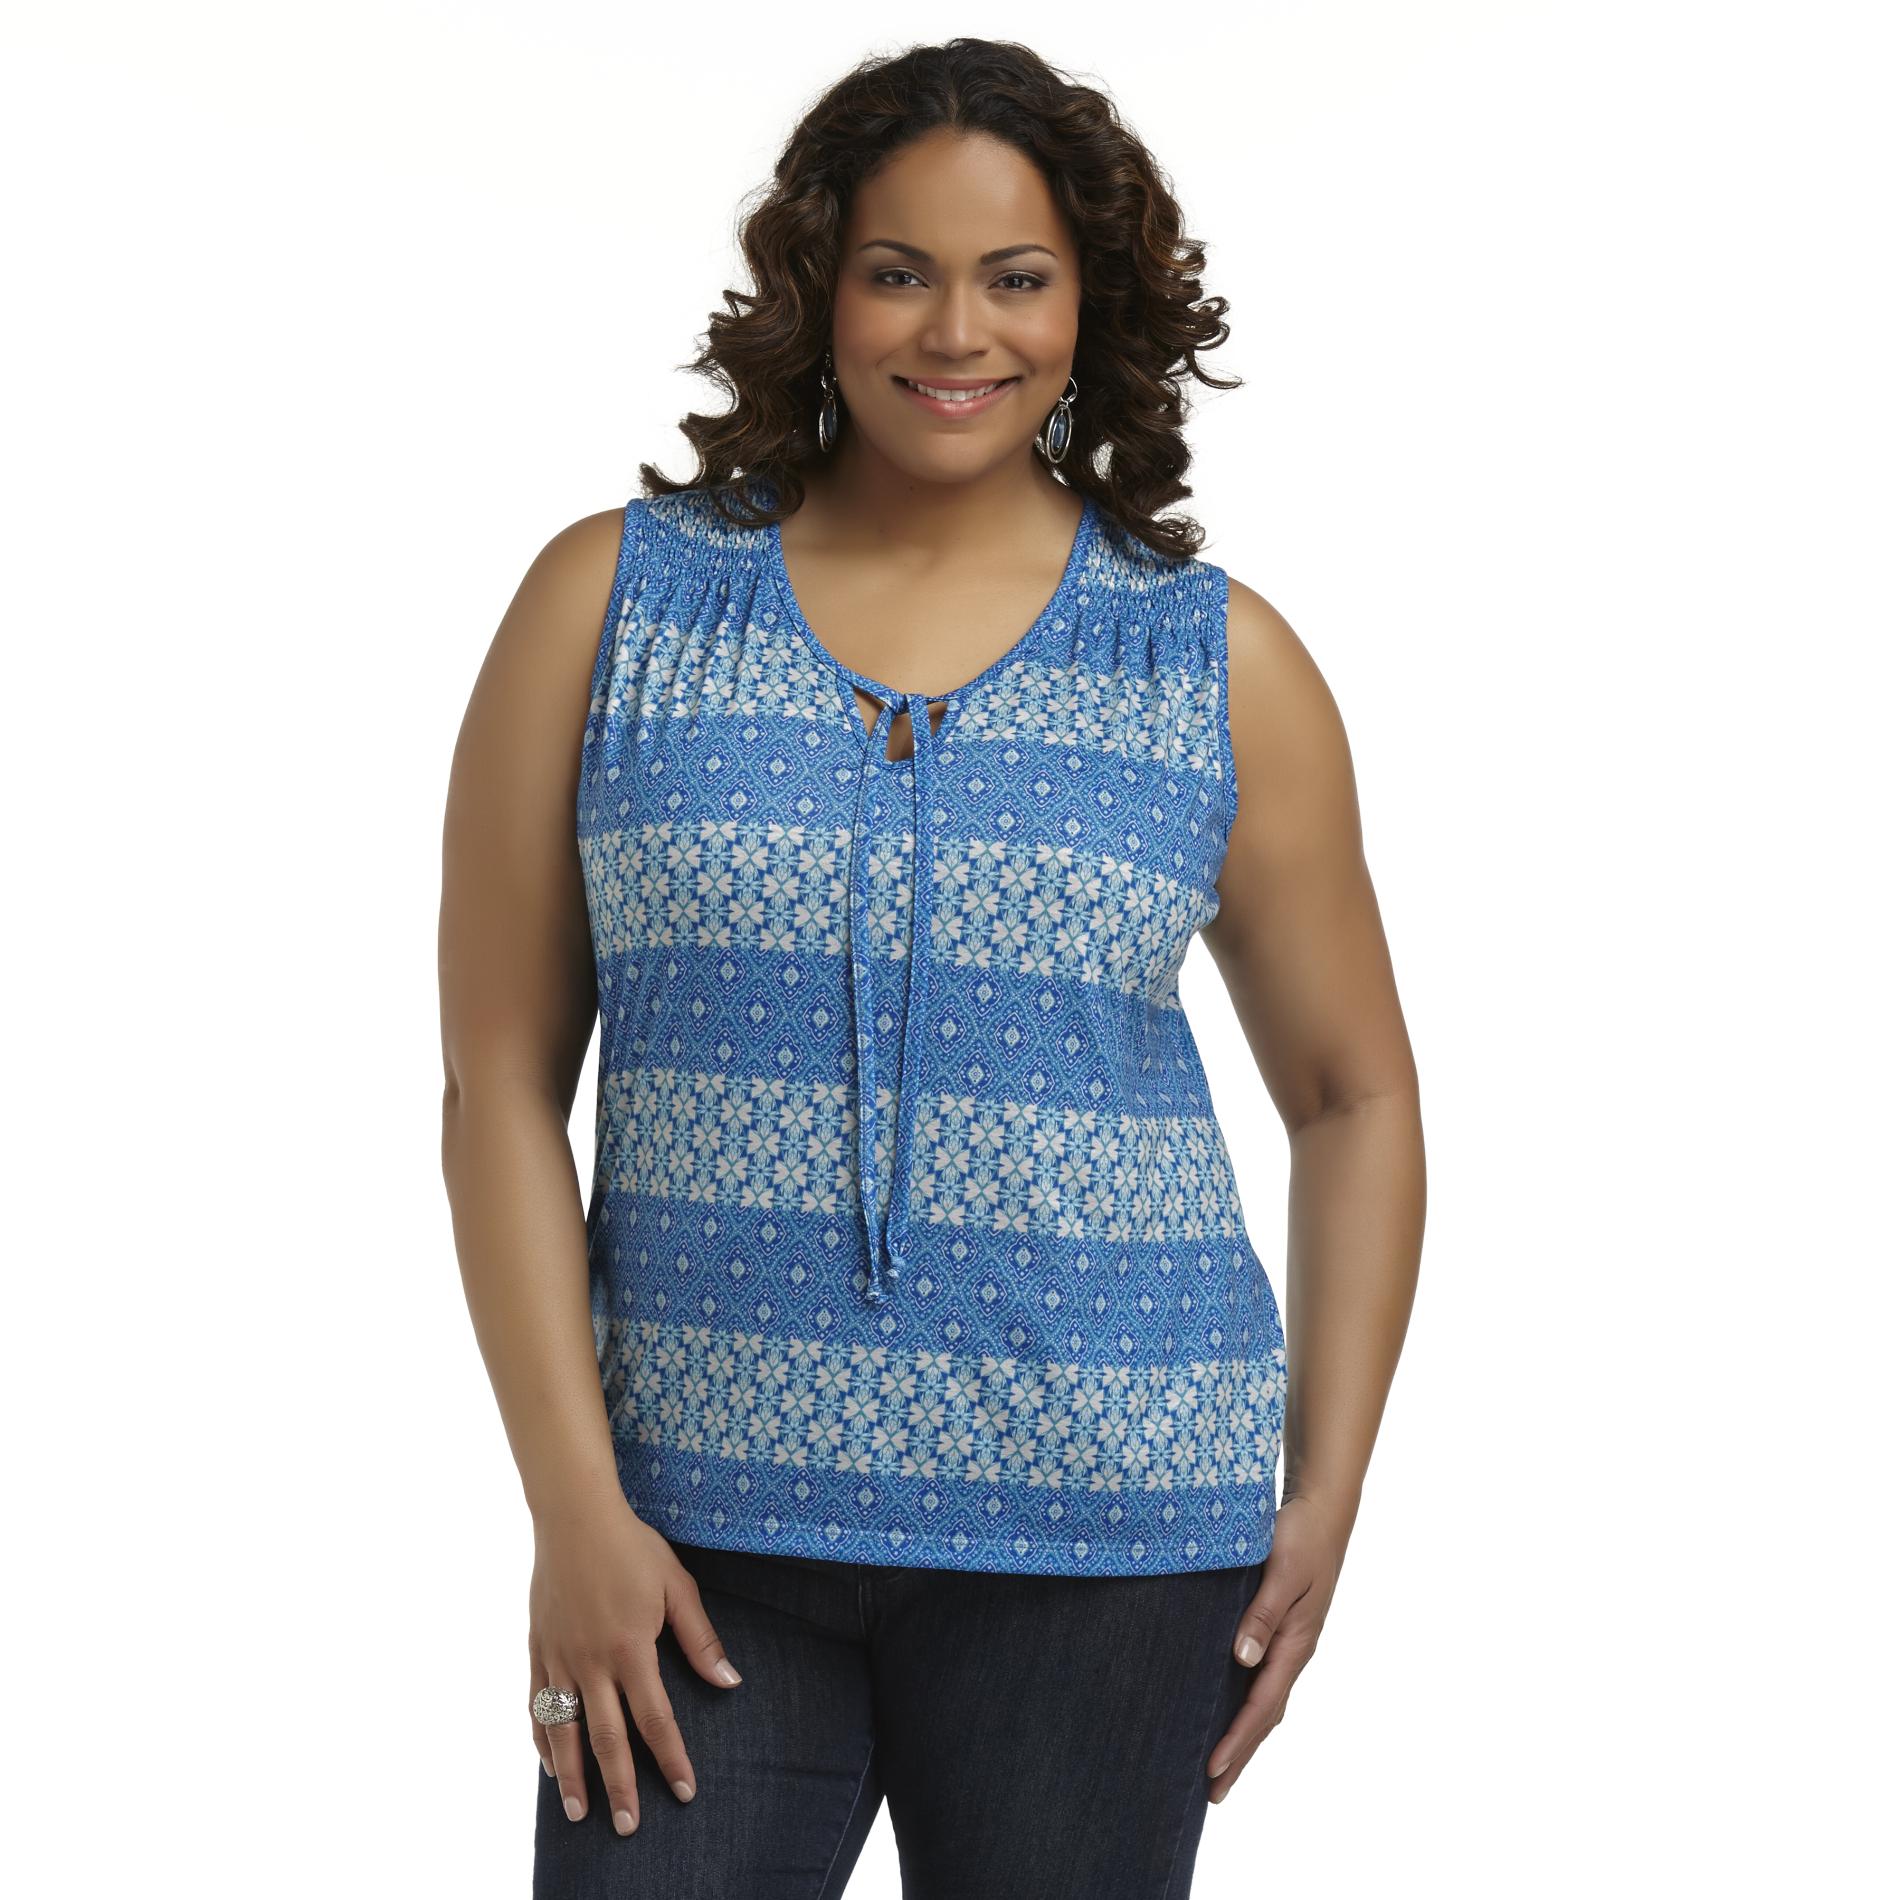 Basic Editions Women's Plus Sleeveless Knit Top - Patterned Stripes